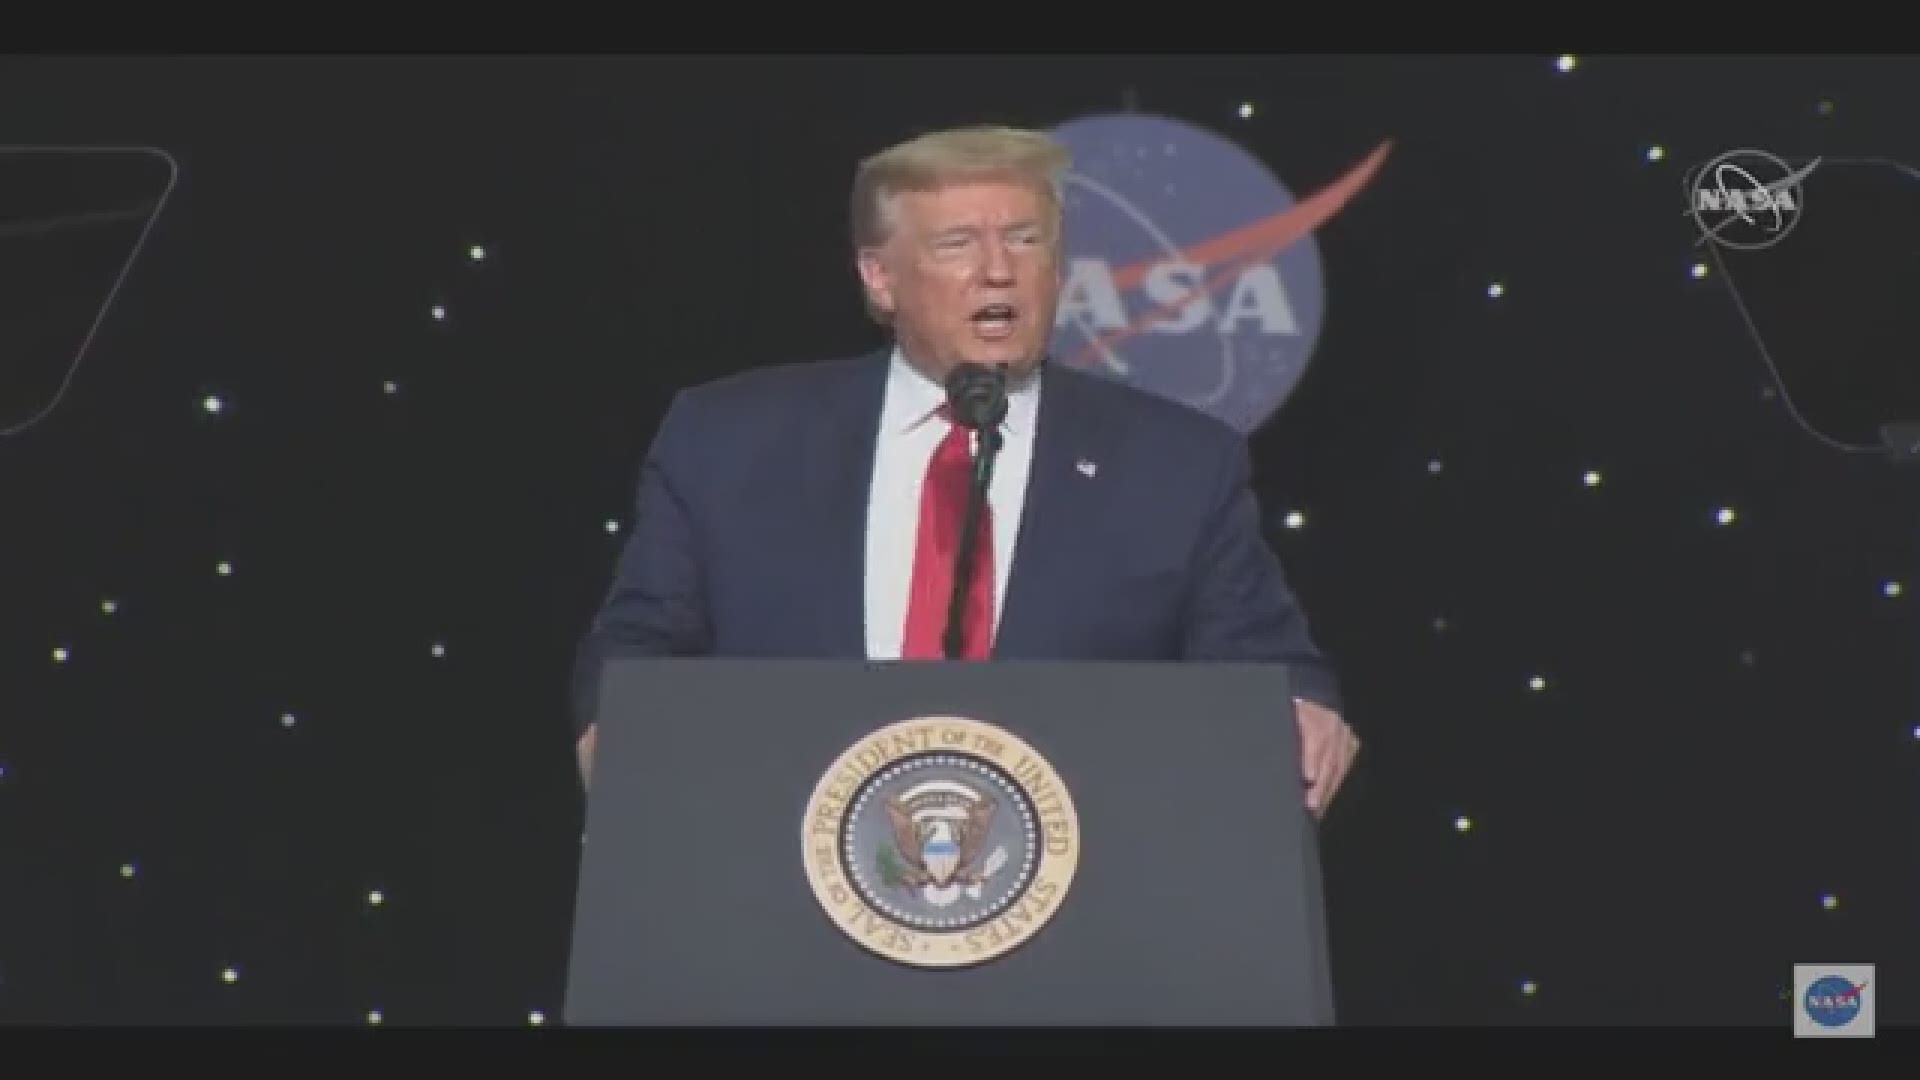 President Donald Trump addressed the nationwide protests over the death of George Floyd while he was at NASA's Kennedy Space Center for the SpaceX launch.